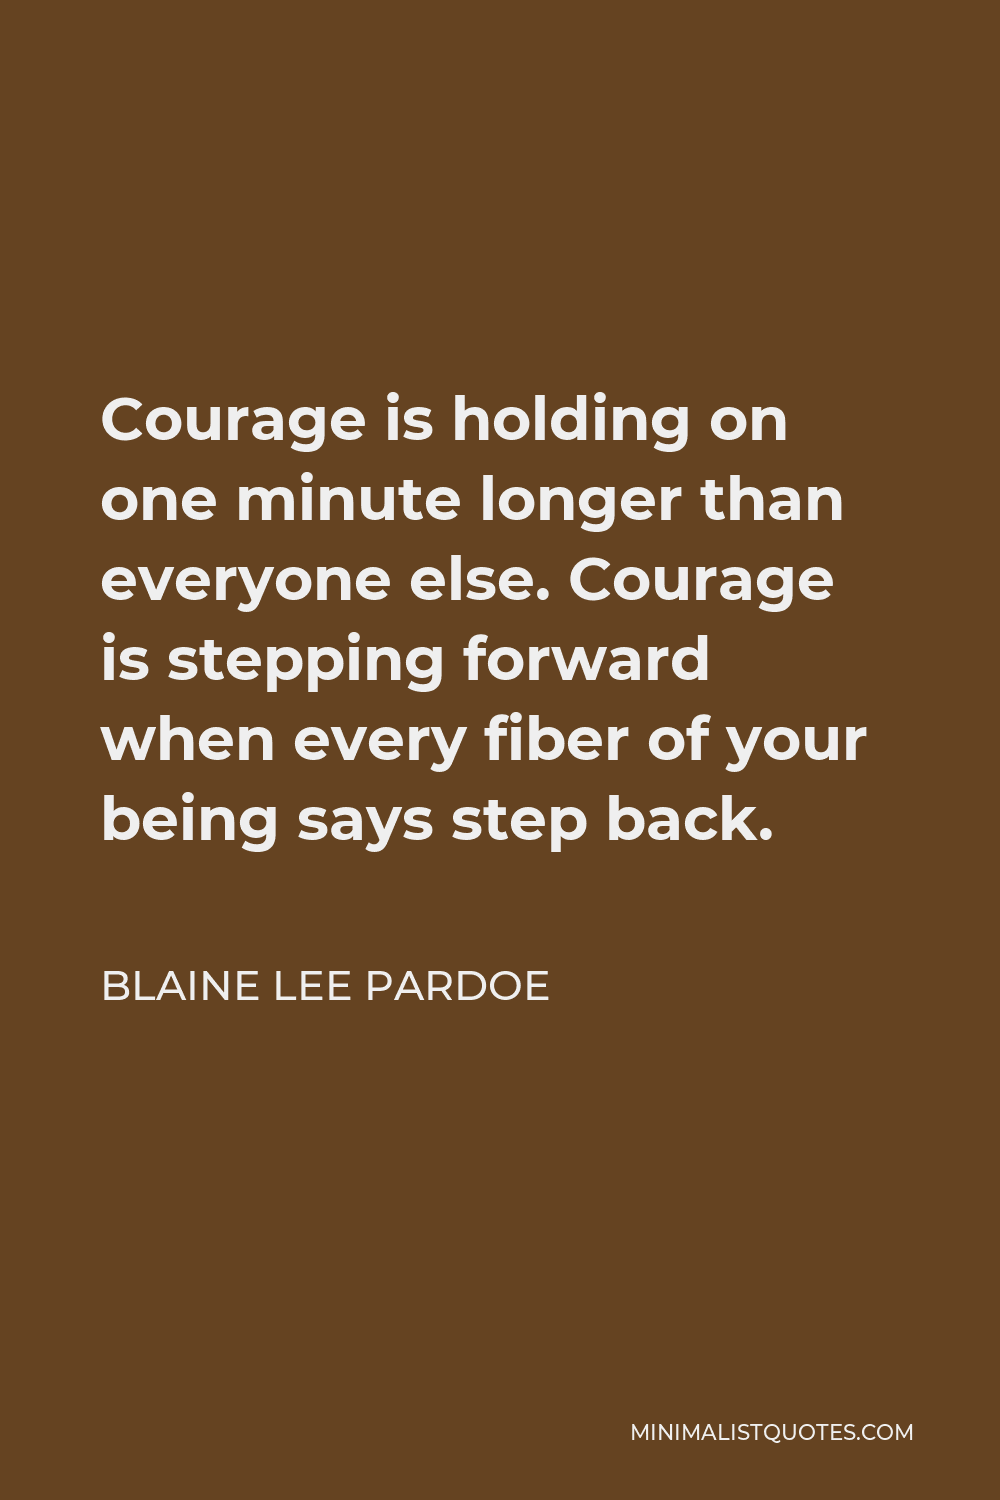 Blaine Lee Pardoe Quote - Courage is holding on one minute longer than everyone else. Courage is stepping forward when every fiber of your being says step back.